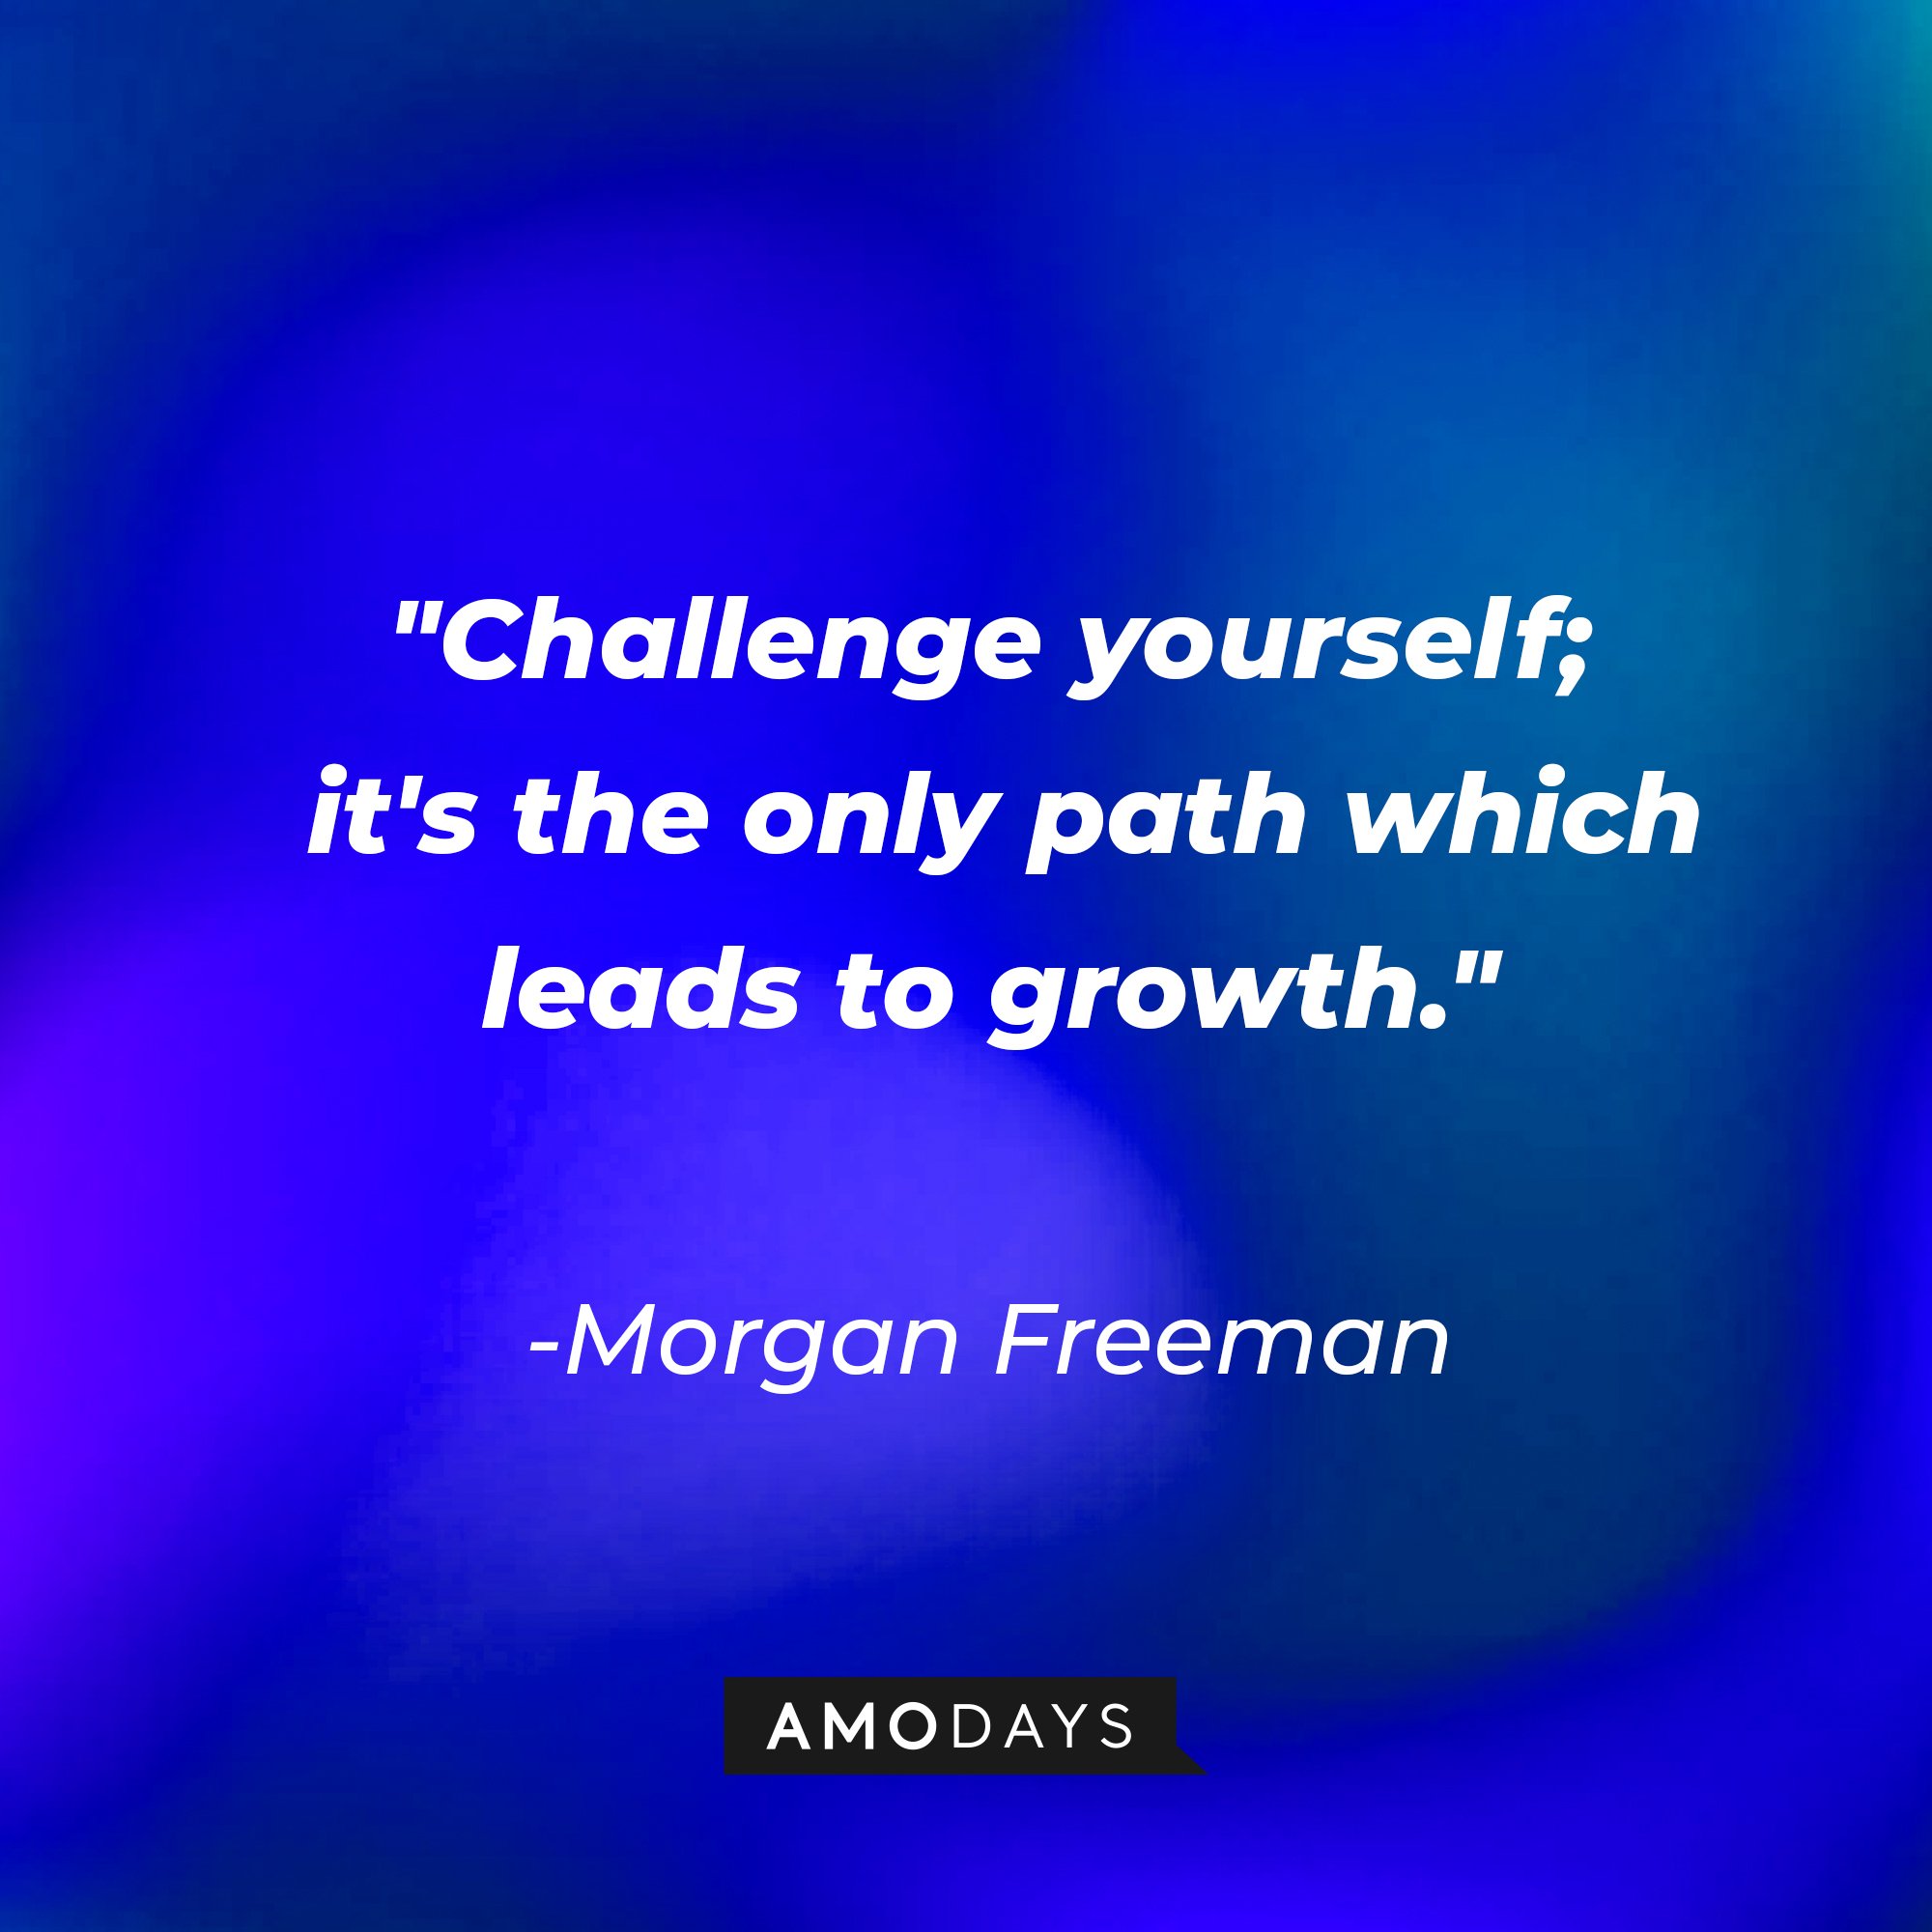 Morgan Freeman’s quote: "Challenge yourself; it's the only path which leads to growth." | Image: AmoDays